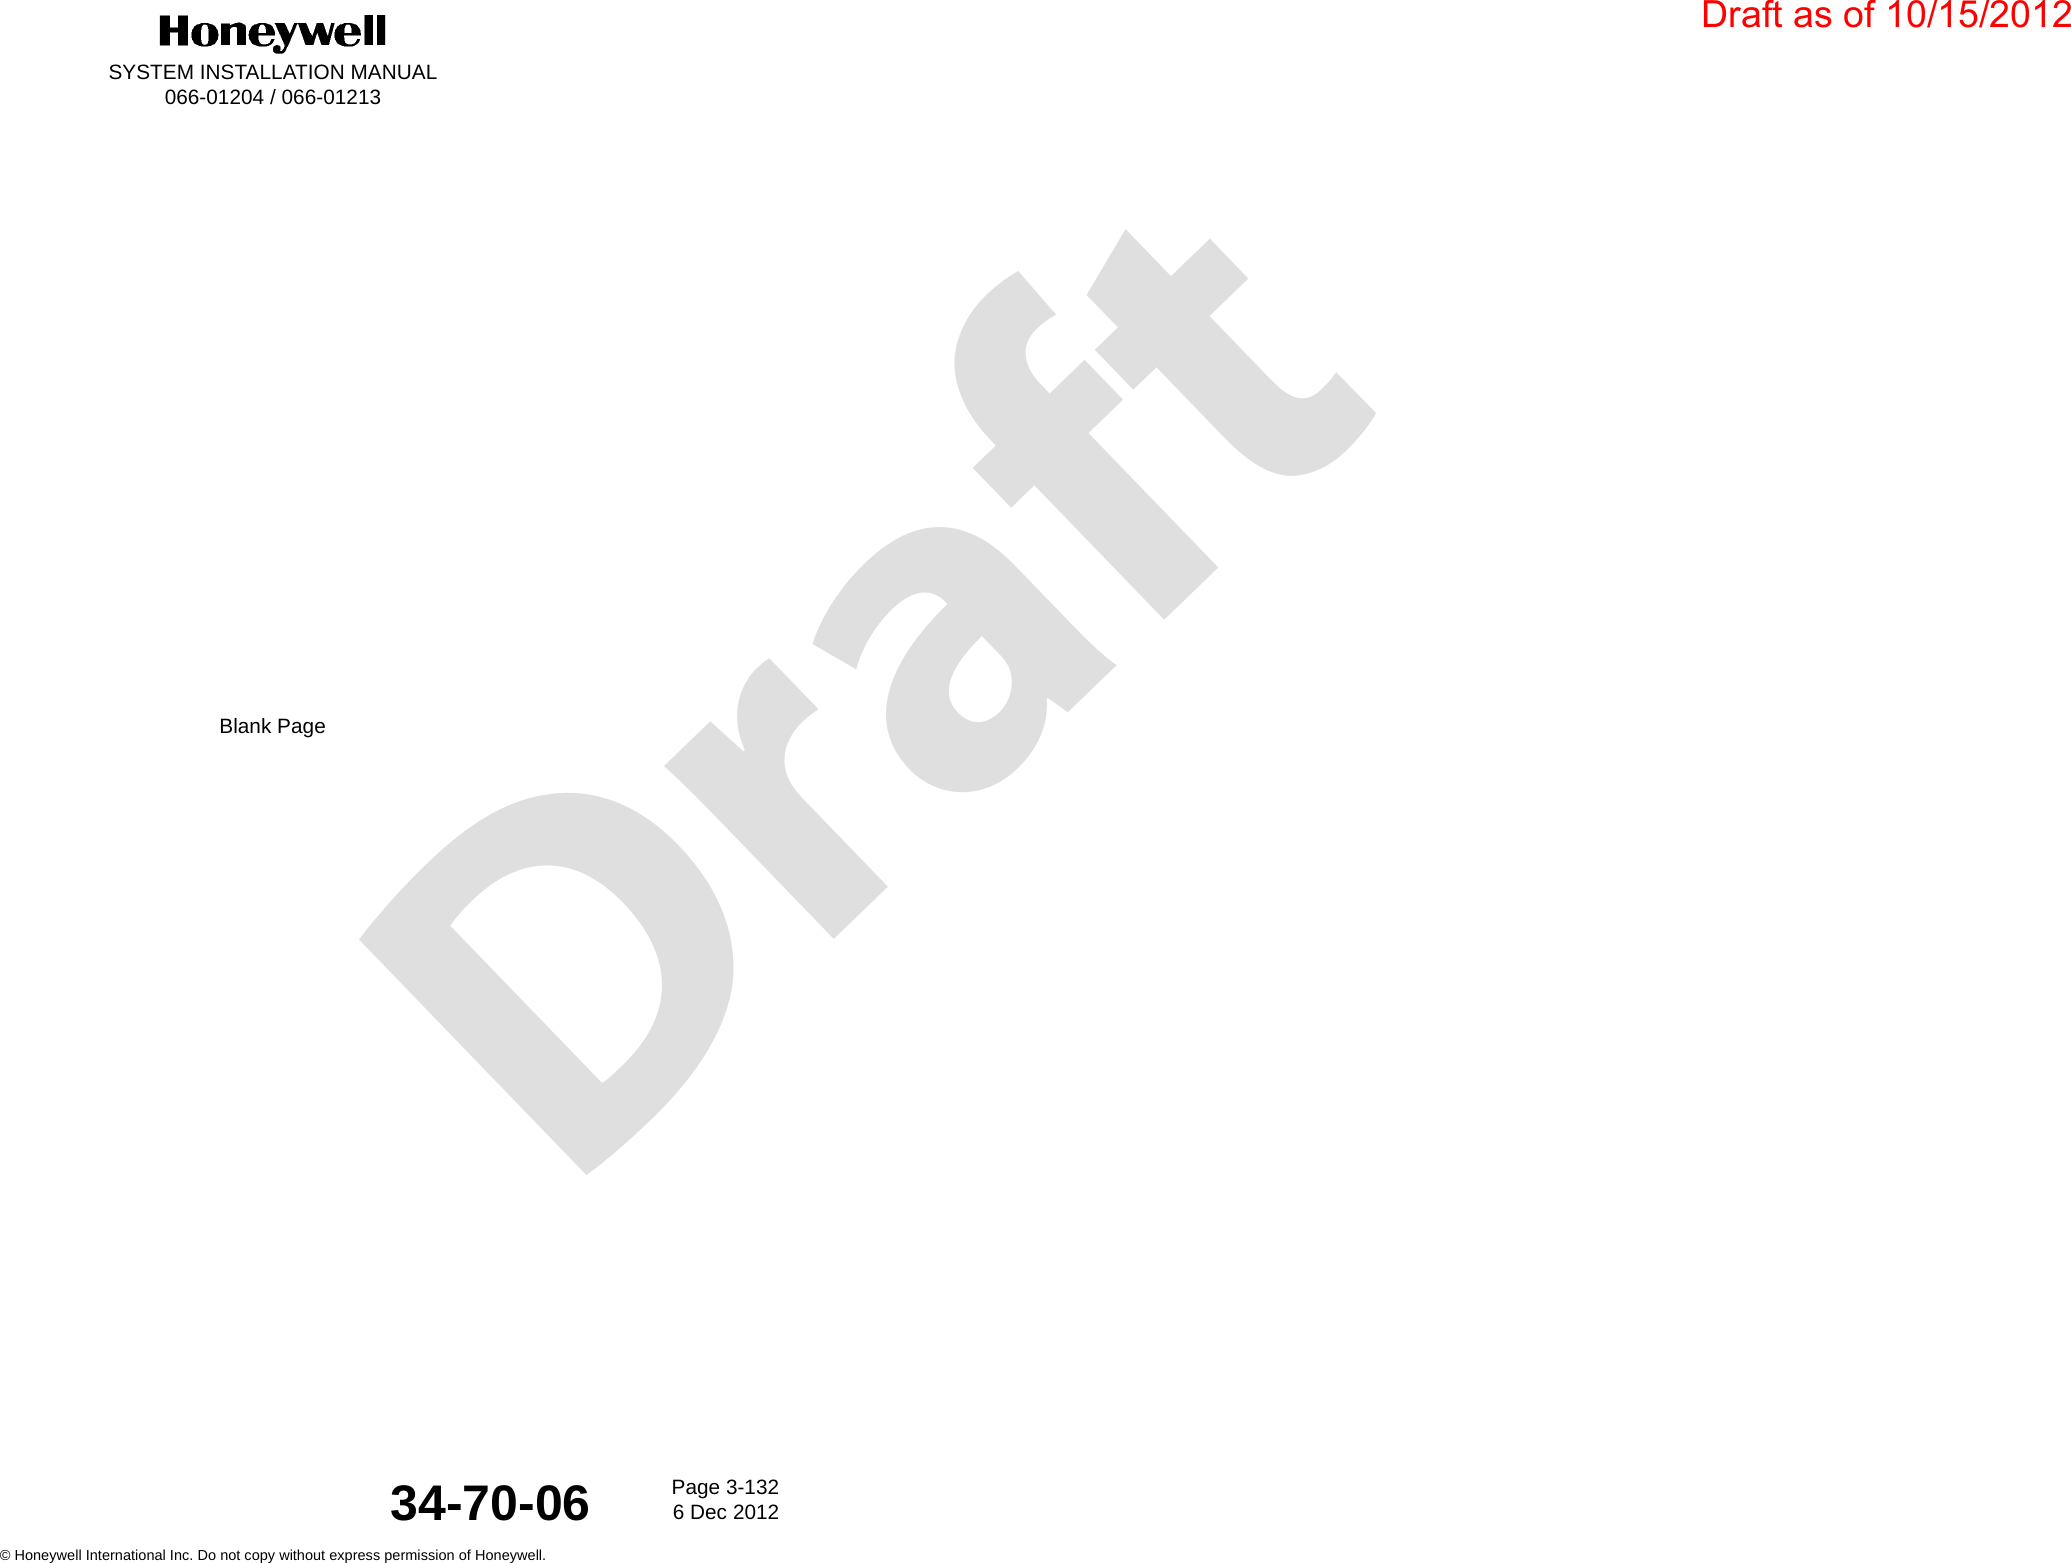 DraftSYSTEM INSTALLATION MANUAL066-01204 / 066-01213Page 3-1326 Dec 2012© Honeywell International Inc. Do not copy without express permission of Honeywell.34-70-06Blank PageDraft as of 10/15/2012